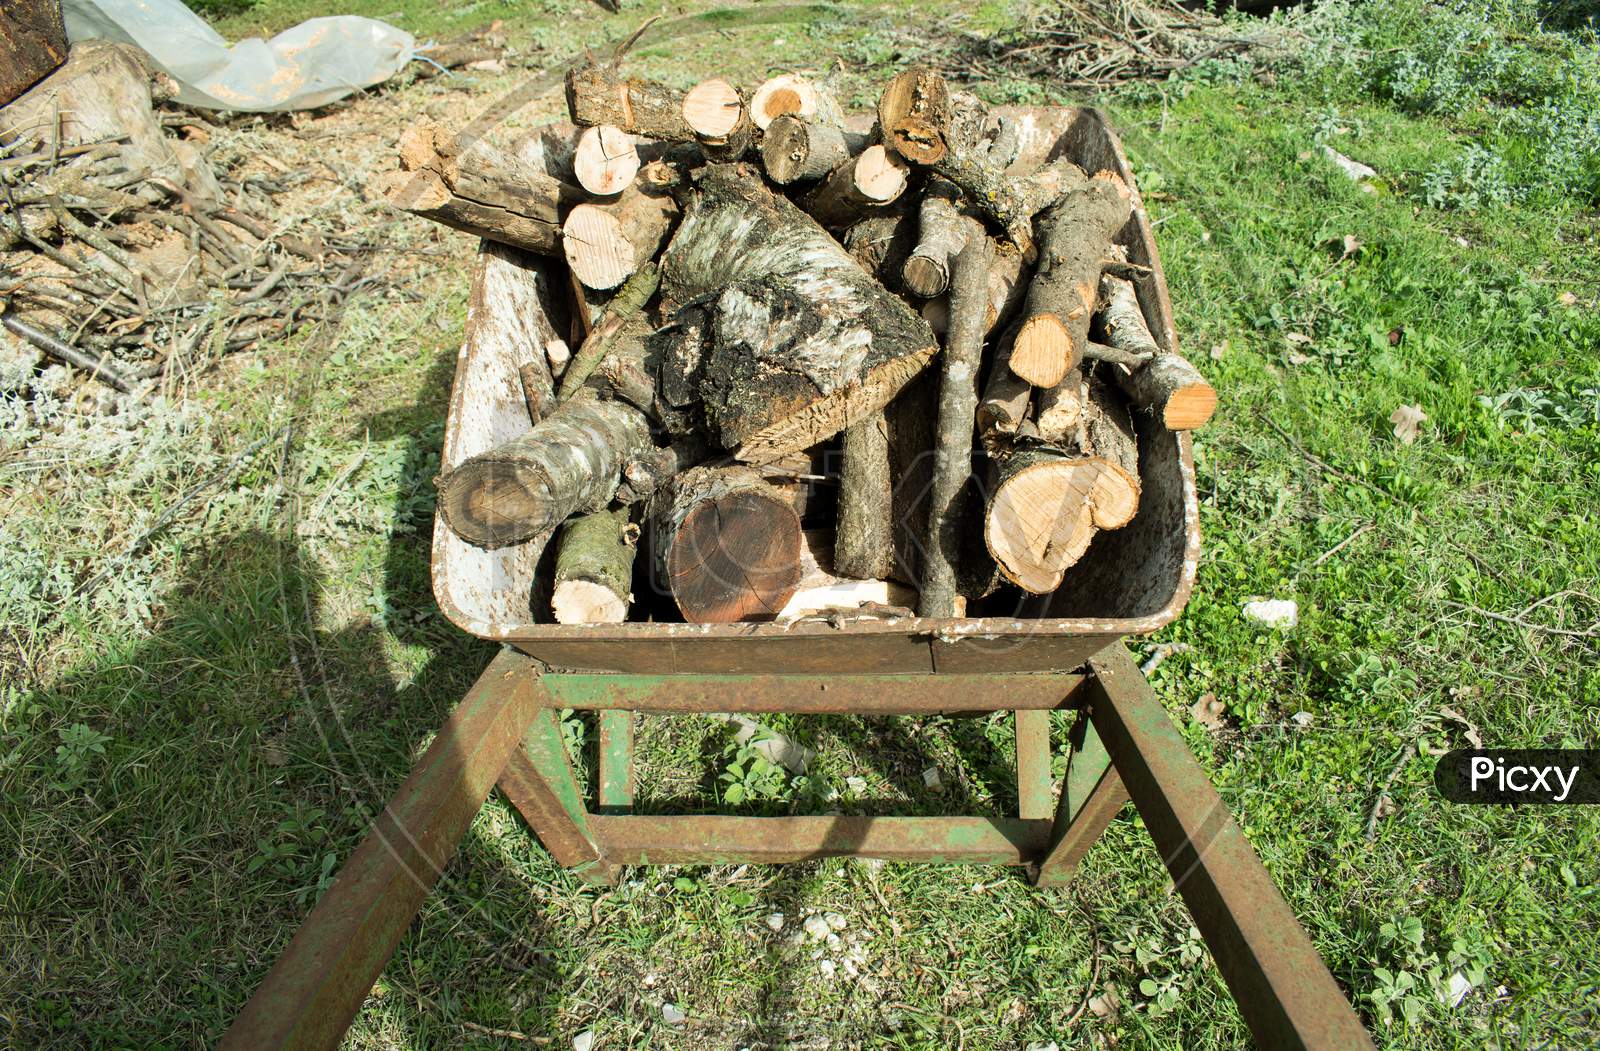 An Old Rusty Wheelbarrow Loaded With Dry Chopped Firewood In A Pile Stands On The Ground With Green Grass.